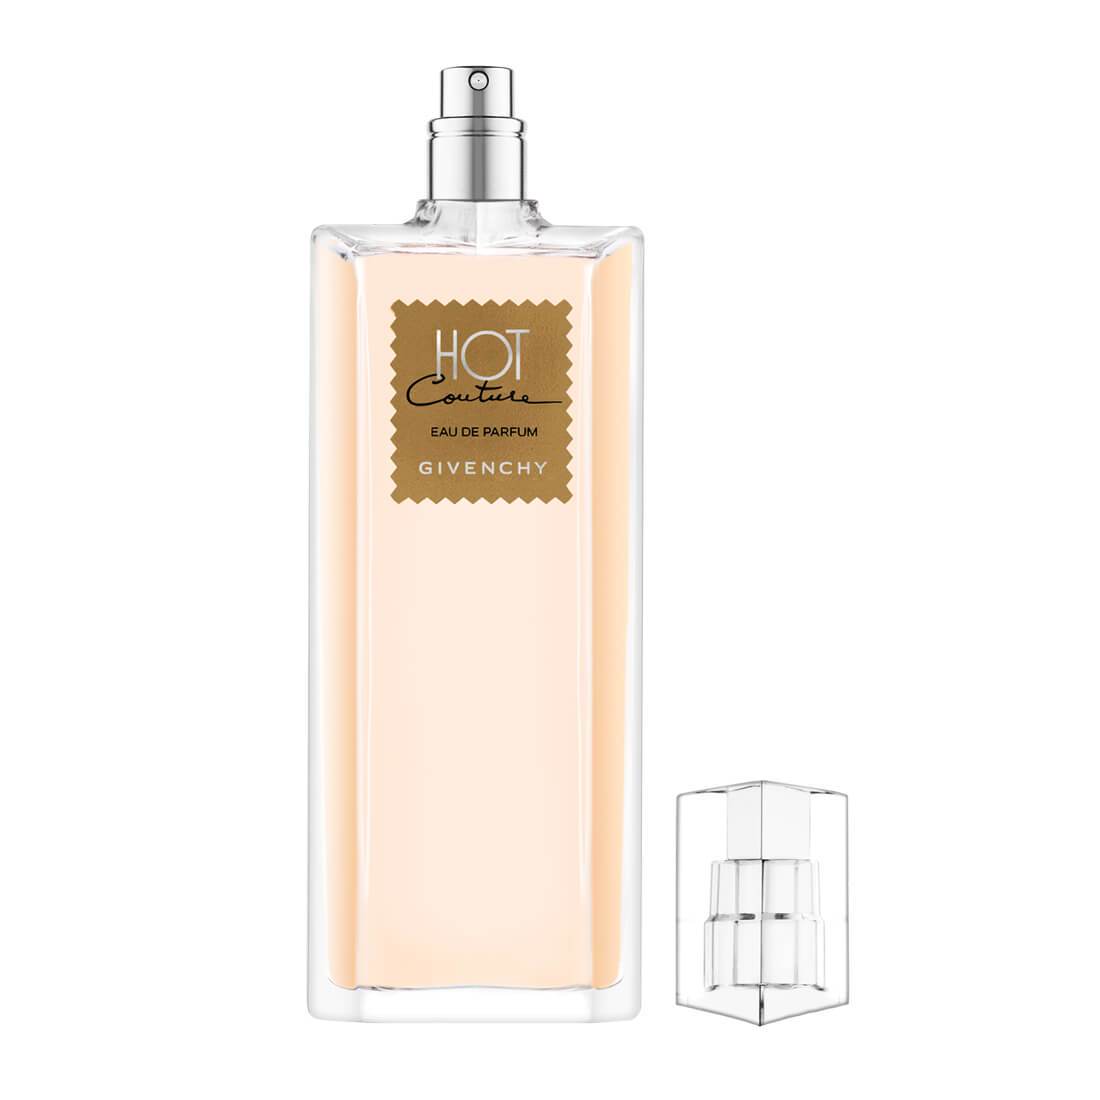 Givenchy Hot Couture EDT Perfume - 100ml